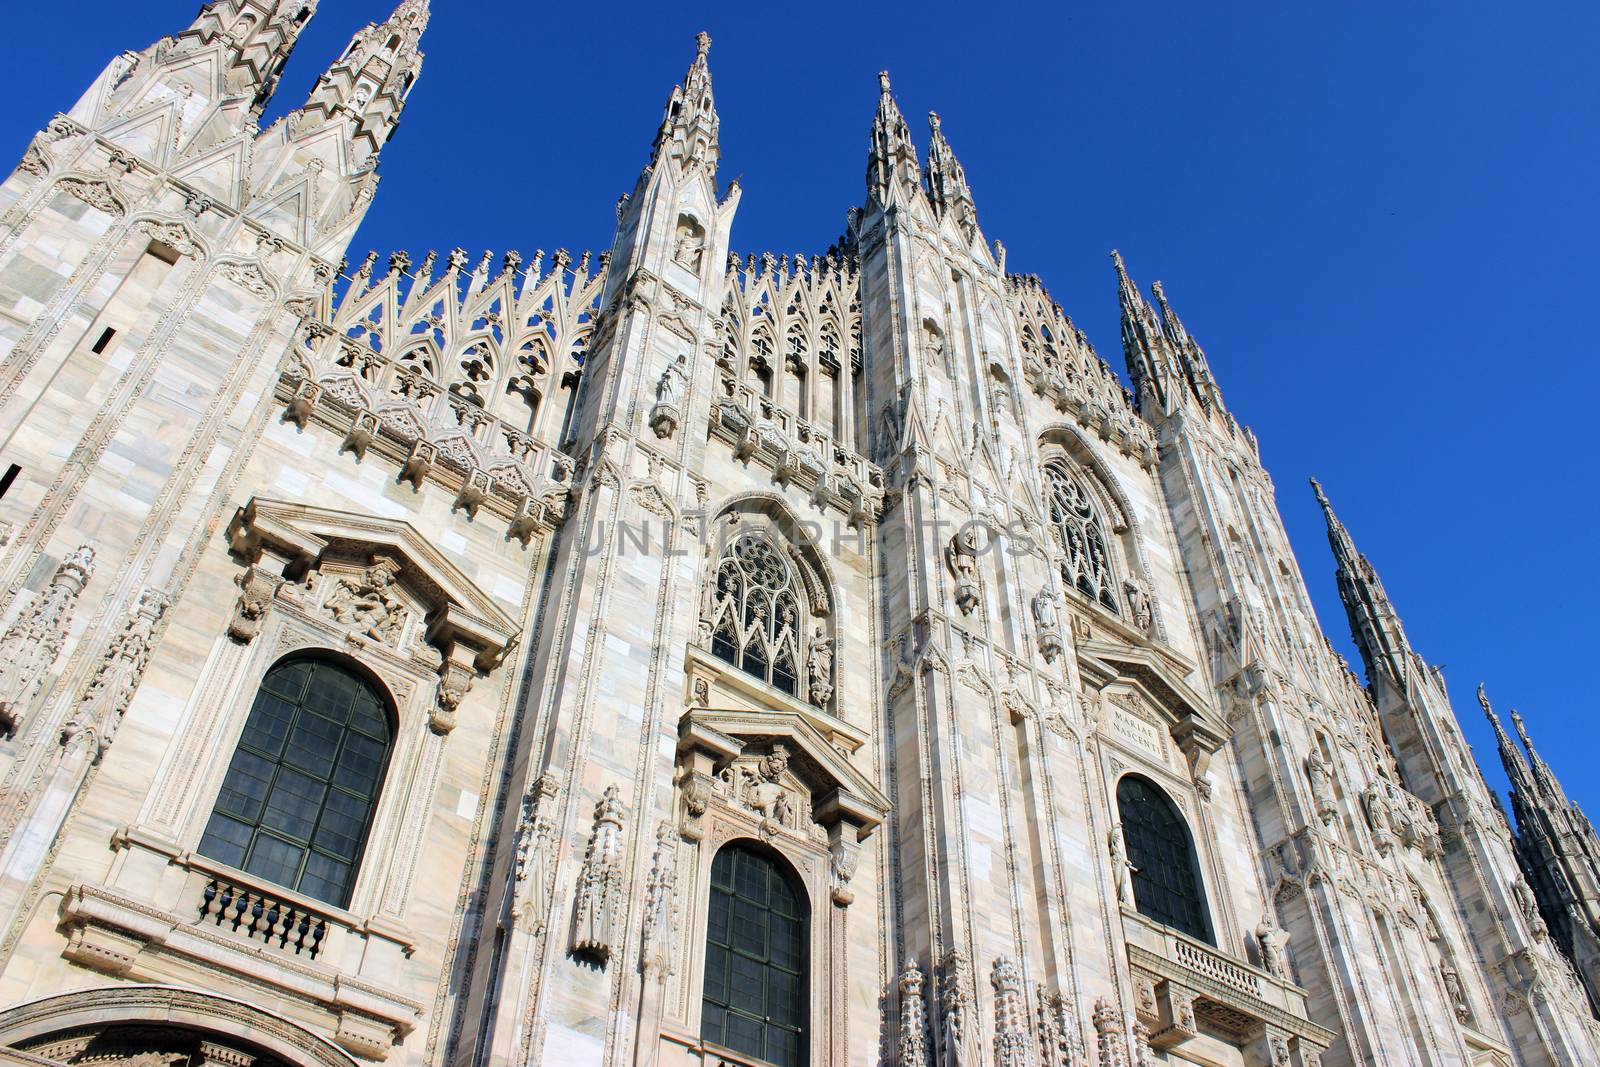 The cathedral church of Milan, Italy. Dedicated to St Mary of the Nativity (Santa Maria Nascente)